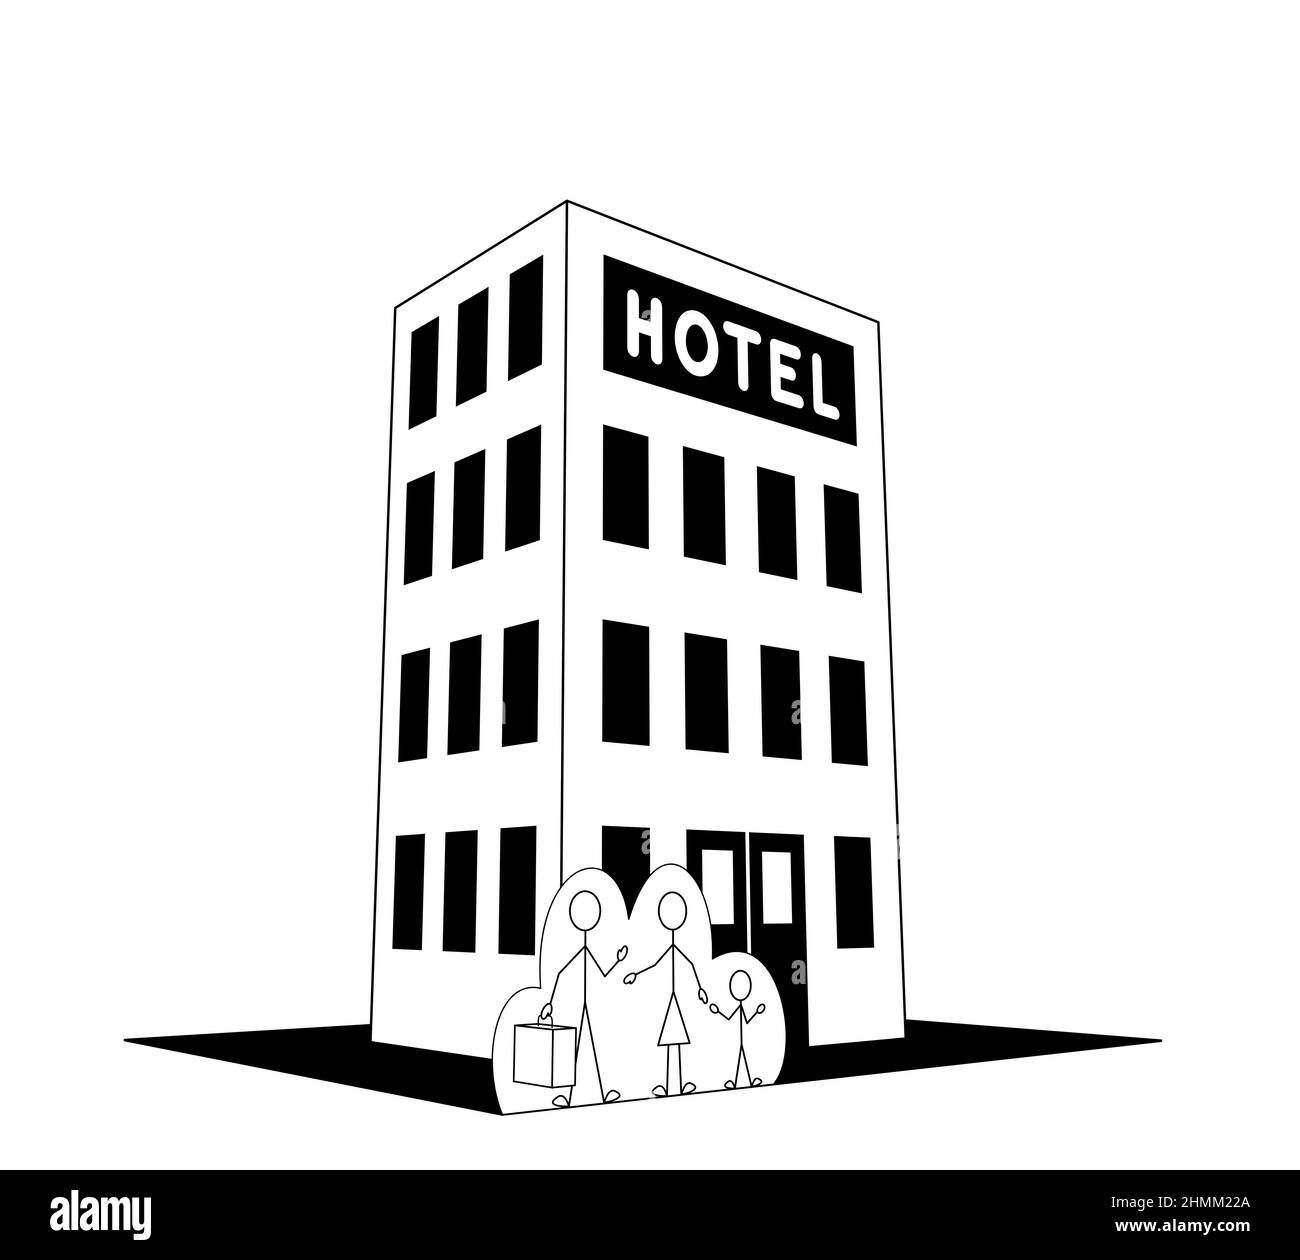 family of three arriving at the hotel, man with suitcase, woman and child. vacation travel conceptual illustration using stick figures Stock Photo